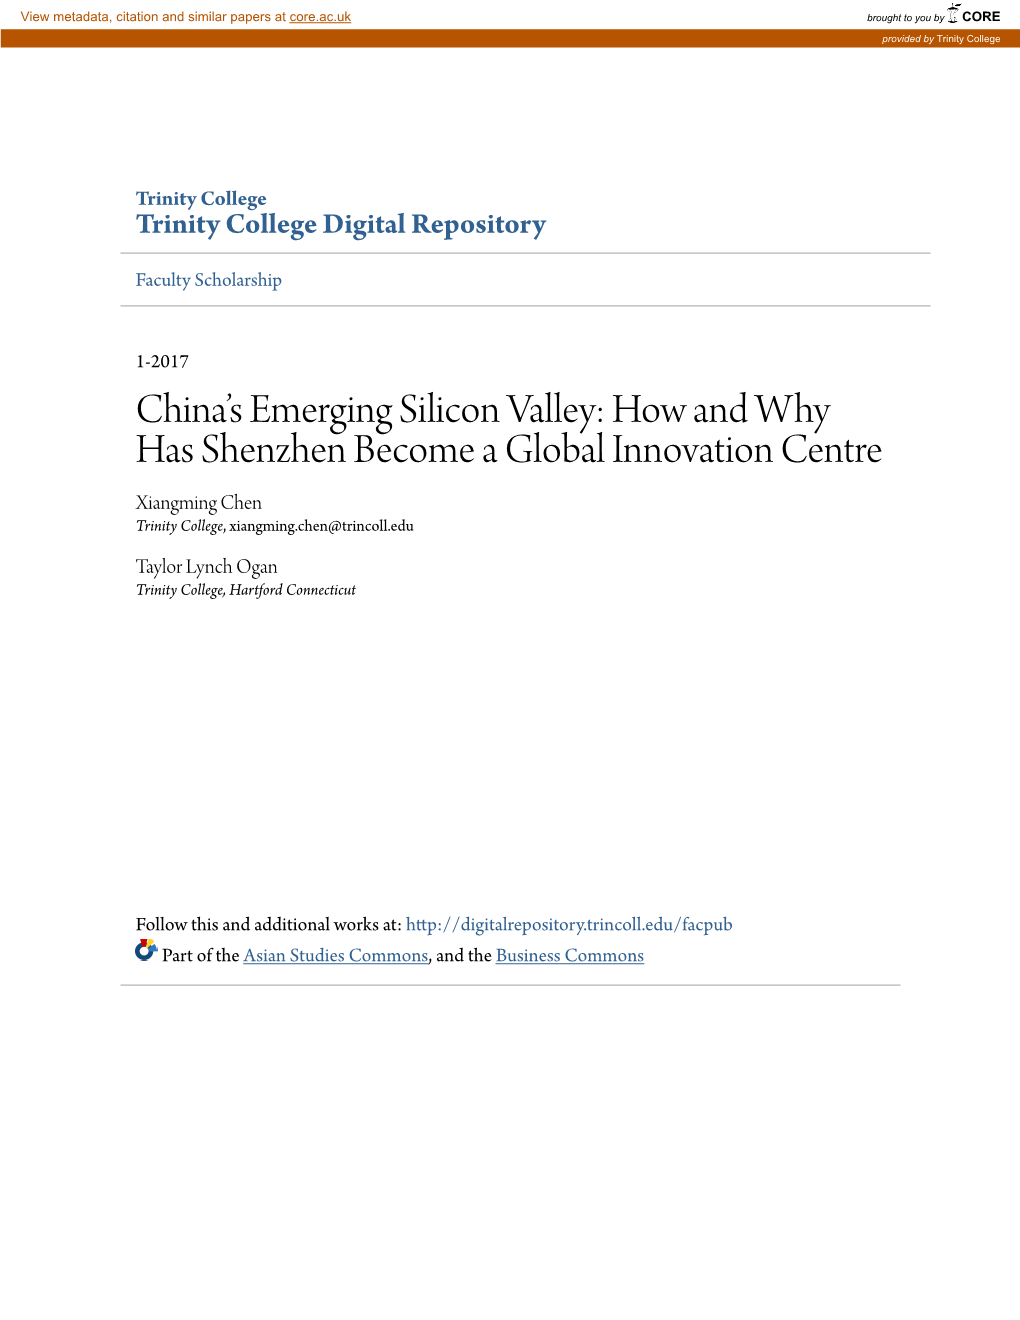 How and Why Has Shenzhen Become a Global Innovation Centre Xiangming Chen Trinity College, Xiangming.Chen@Trincoll.Edu